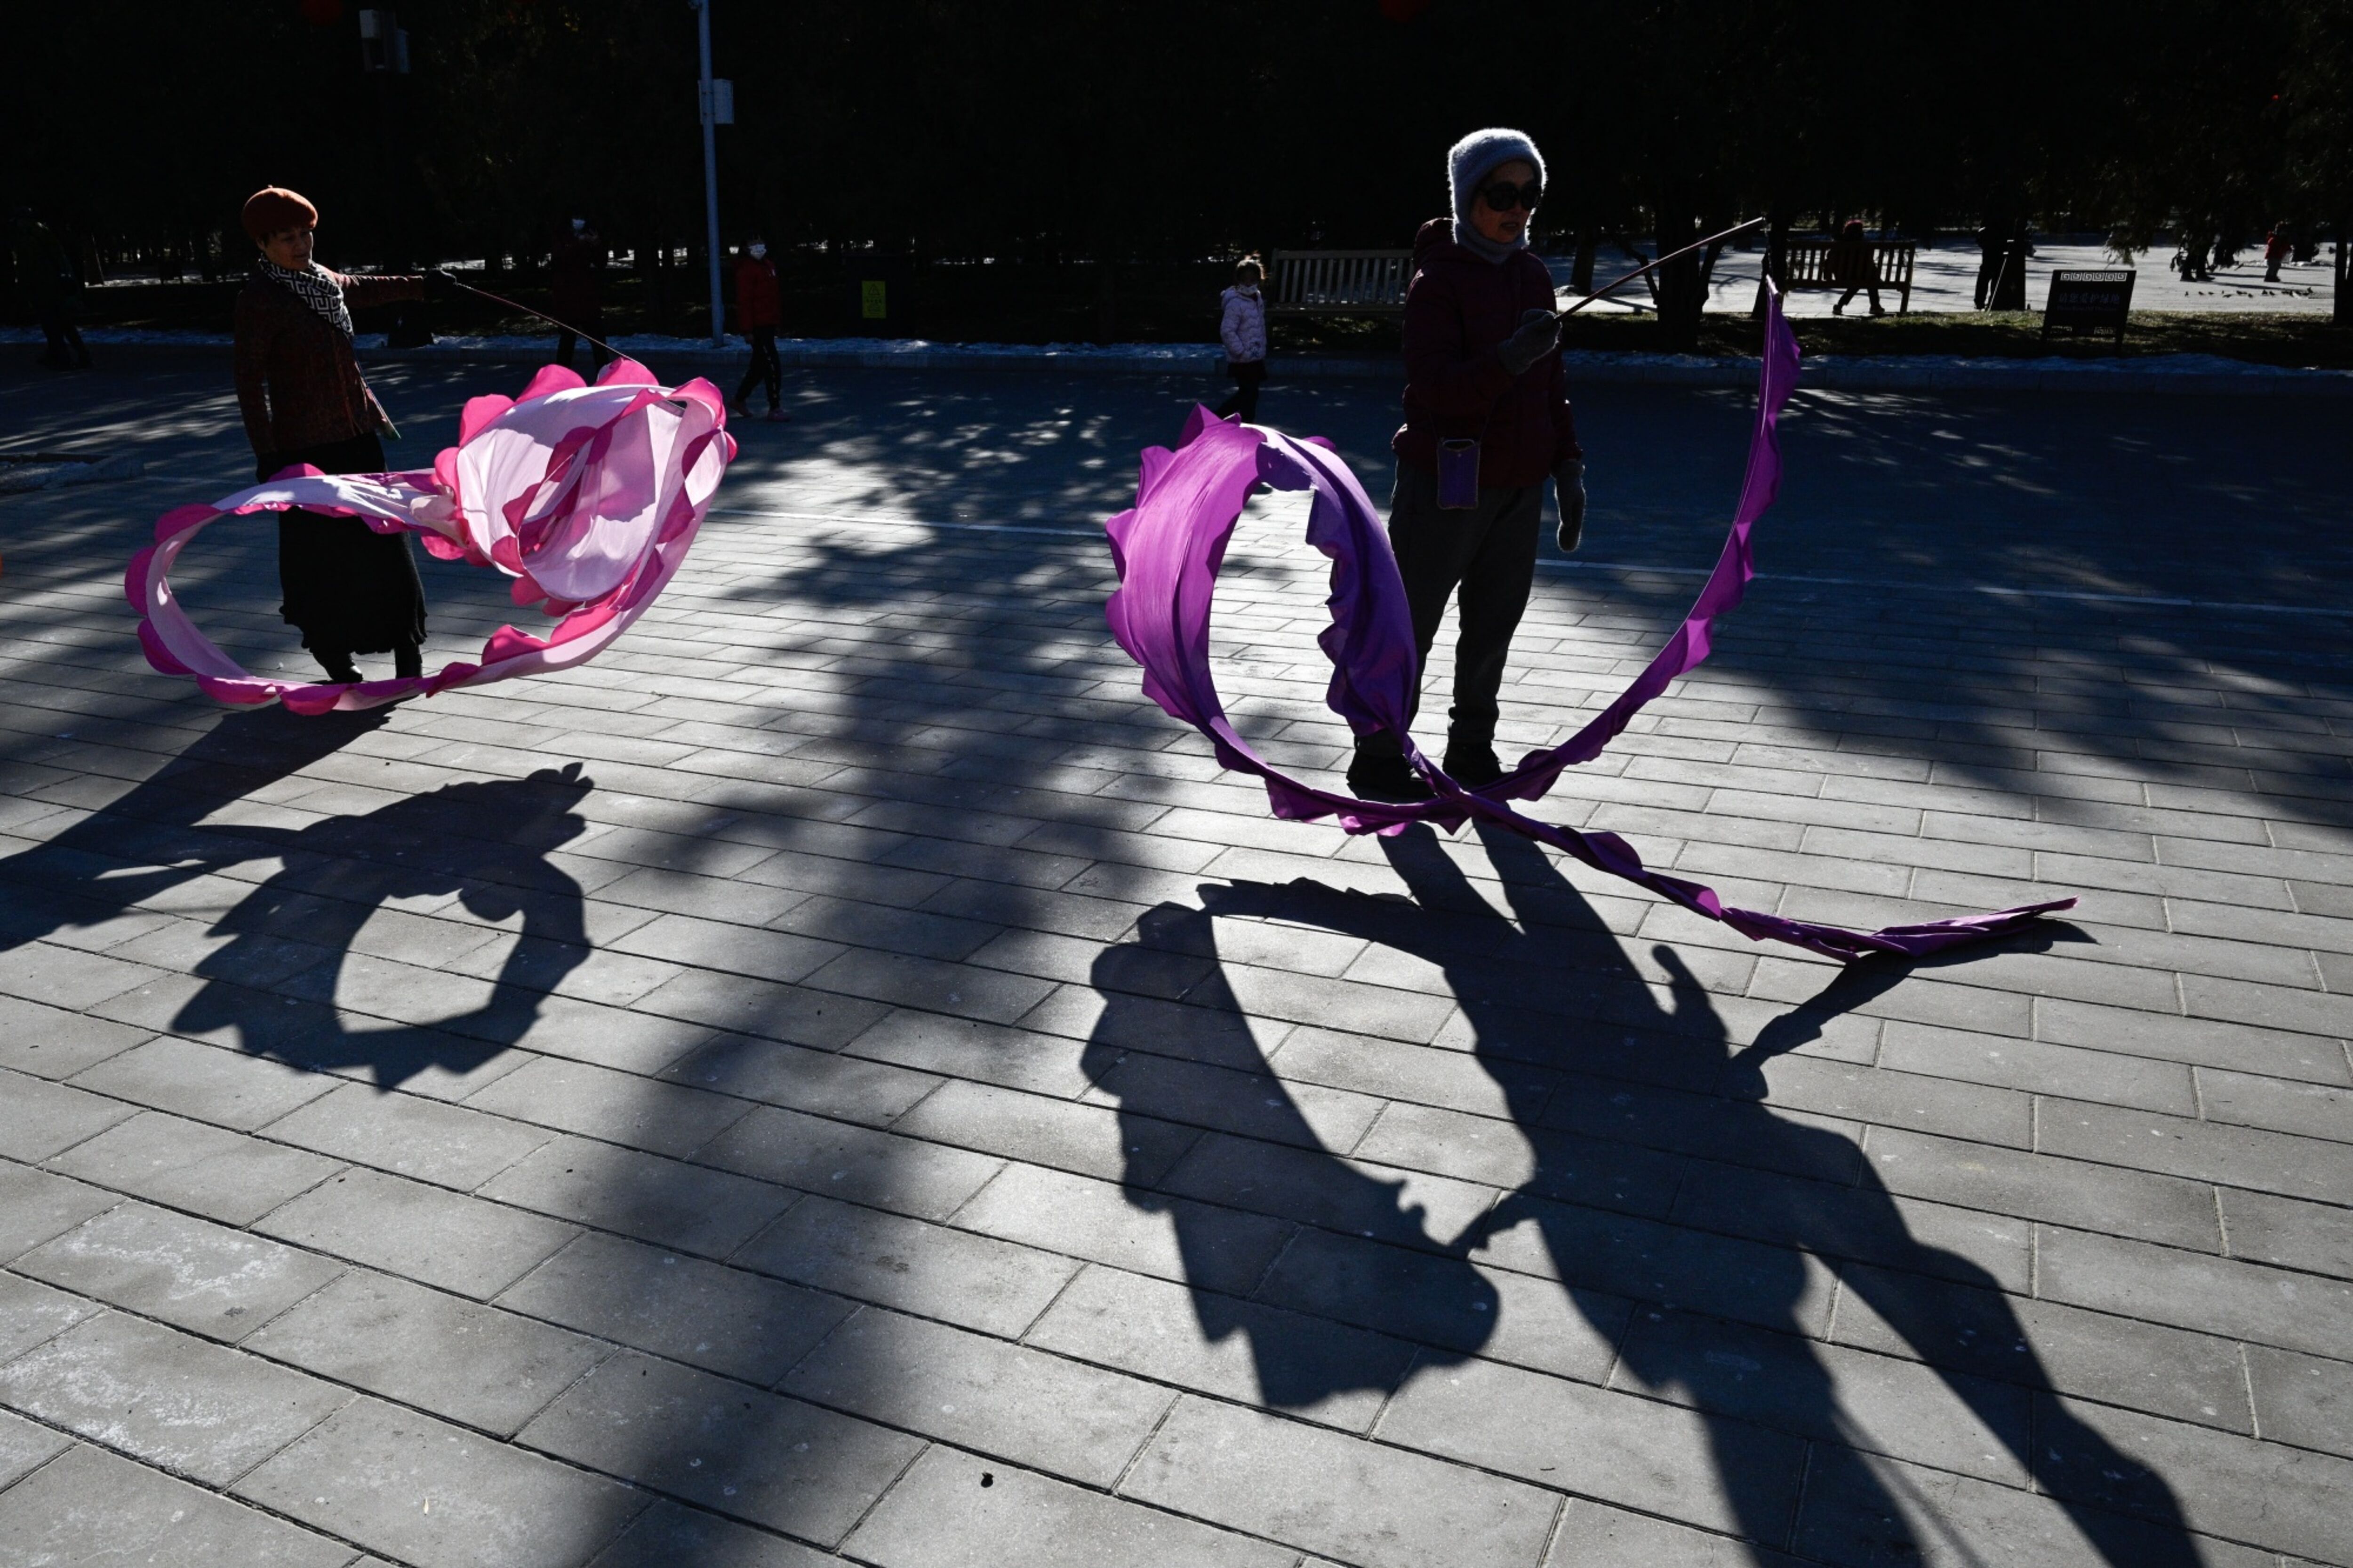 People dance with long ribbons at a park in Beijing on Jan. 24. Photo: Bloomberg